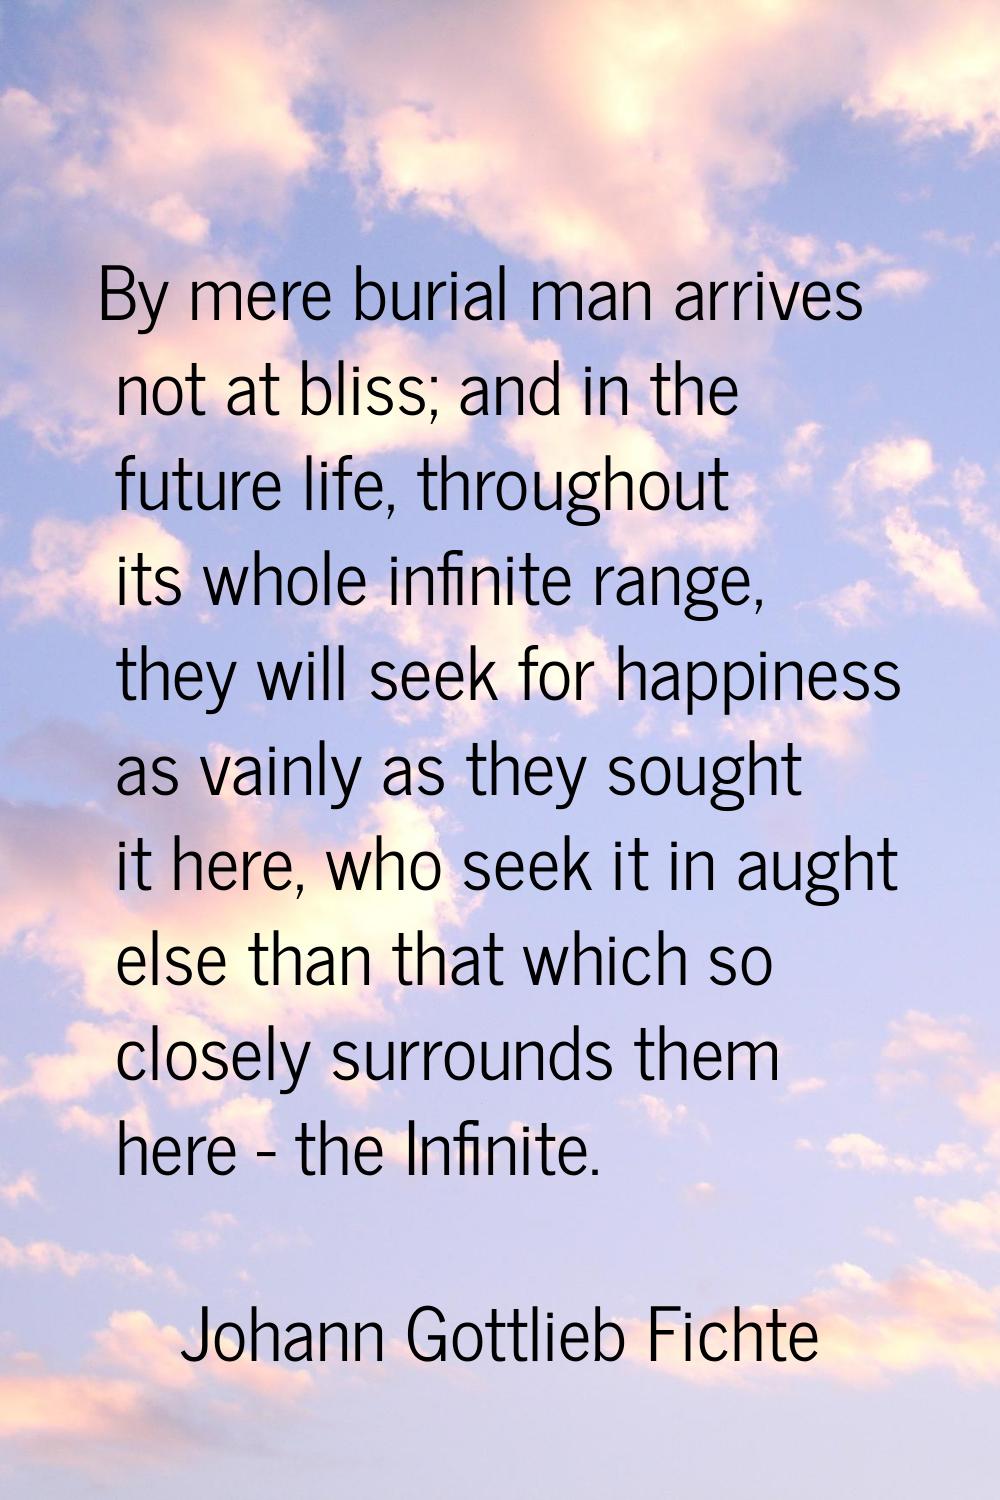 By mere burial man arrives not at bliss; and in the future life, throughout its whole infinite rang